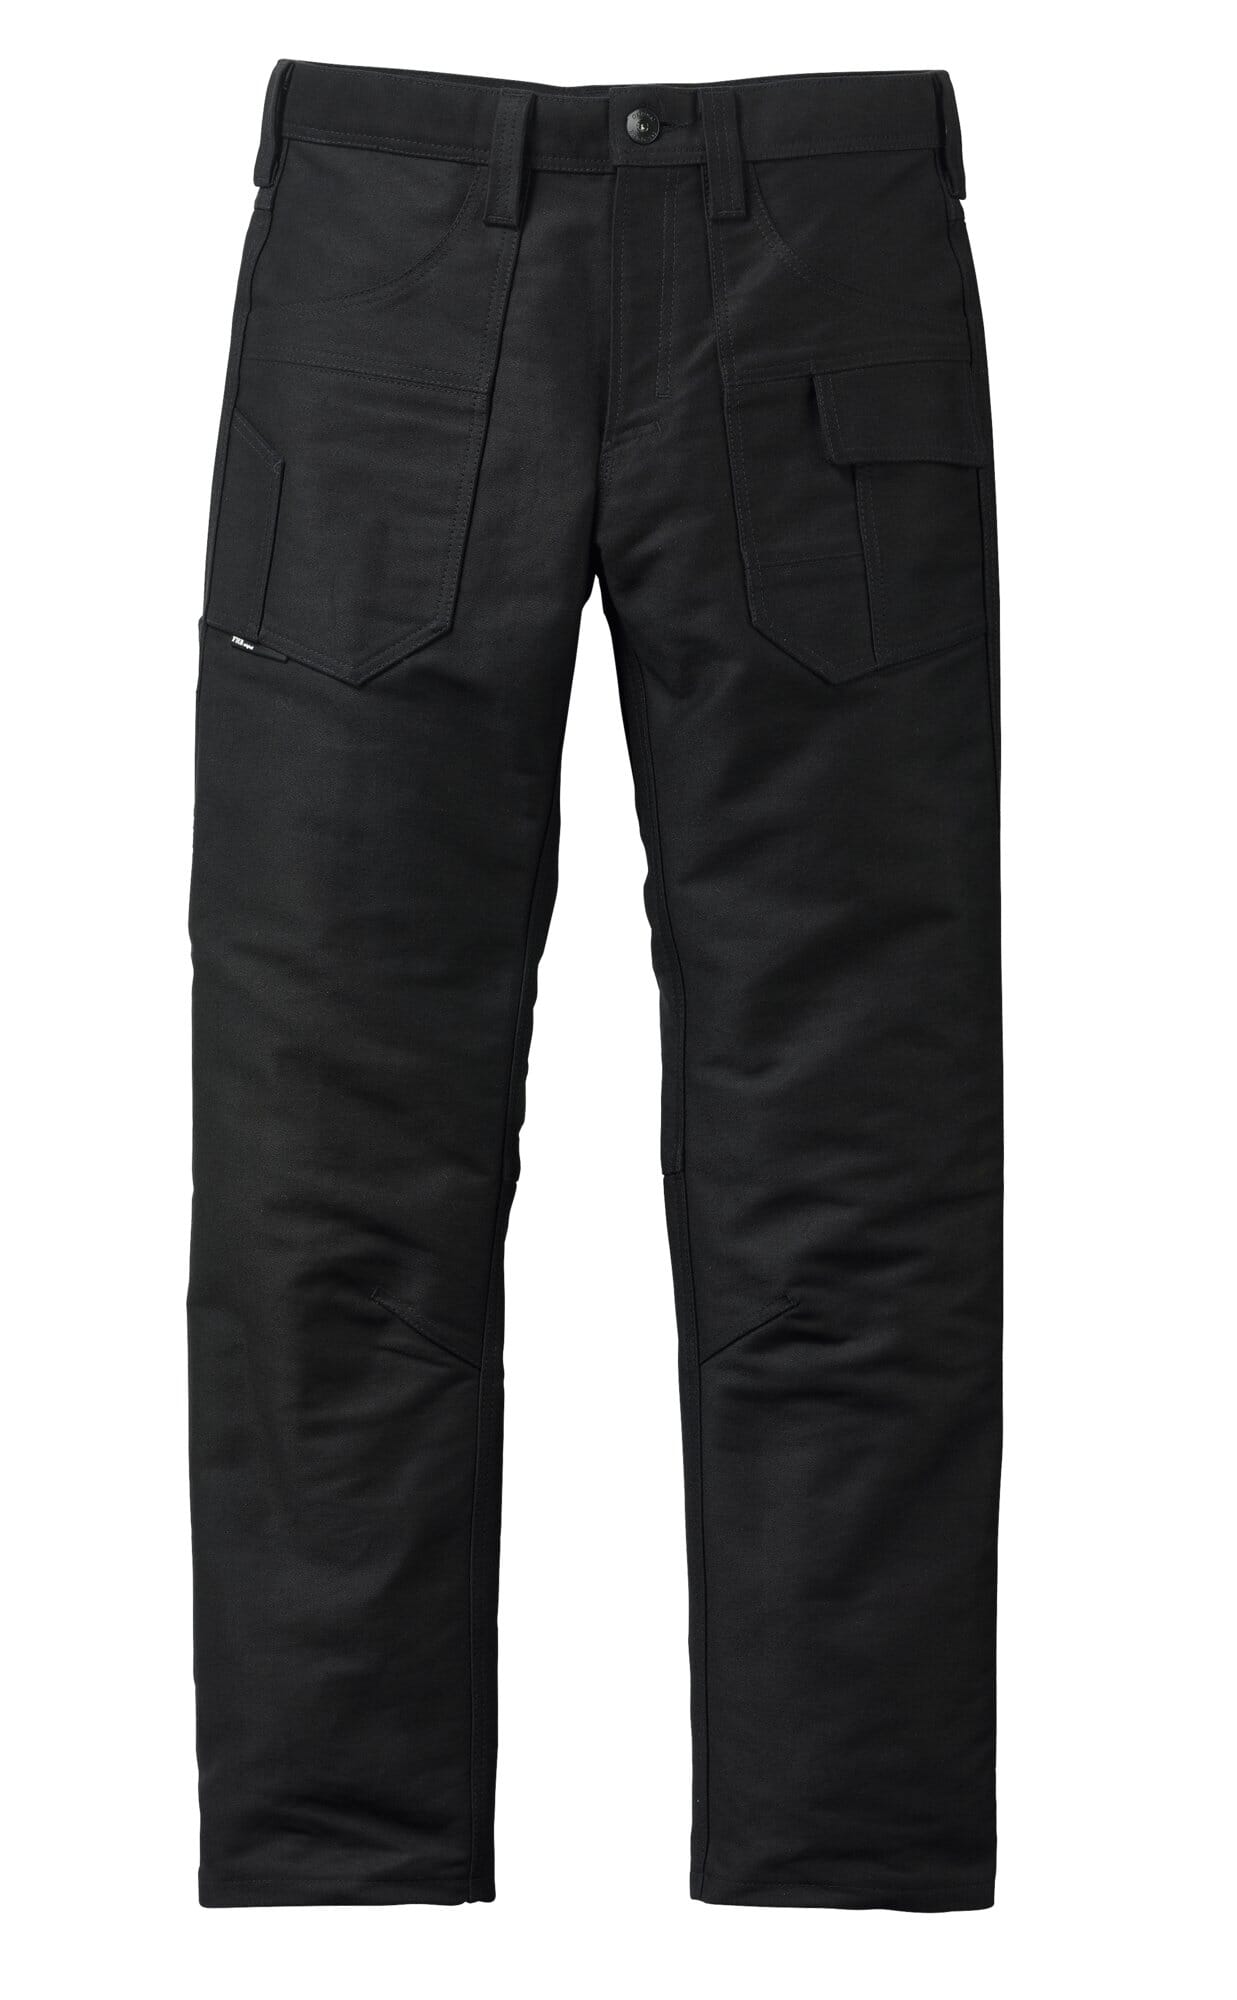 Work trousers for professional craftsmen | Snickers Workwear